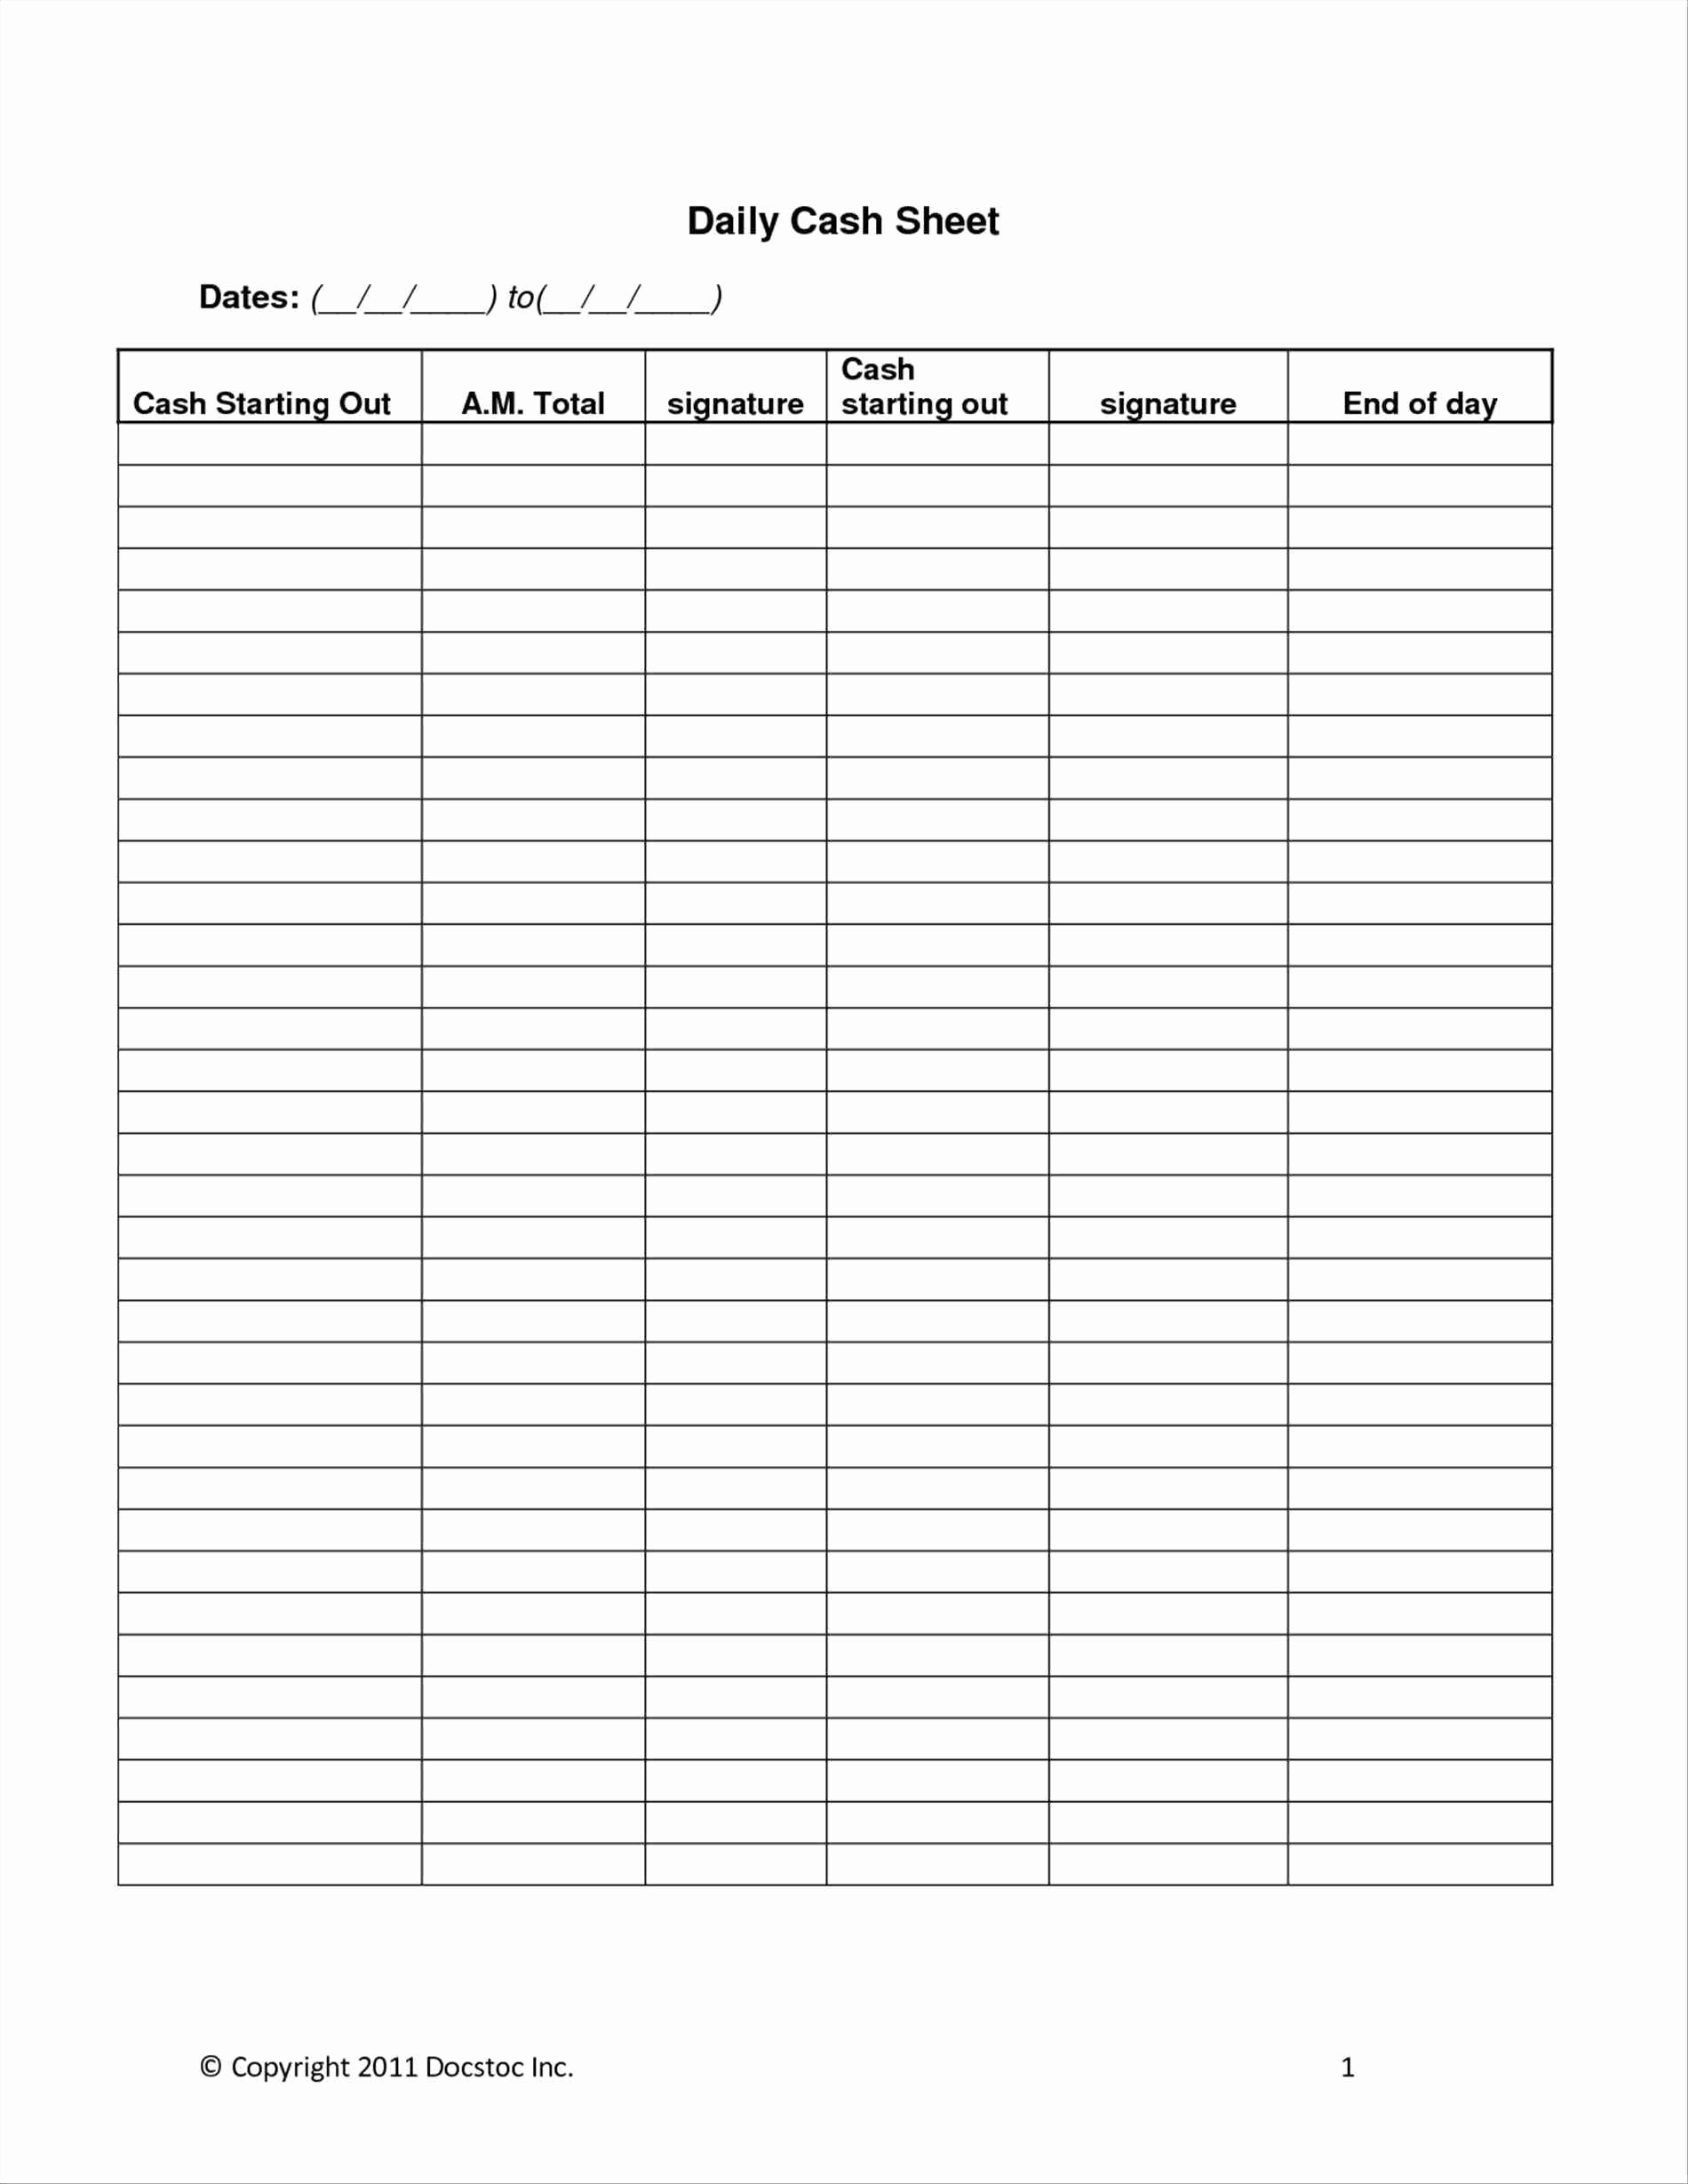 Daily Cash Flow Template Fresh Daily Cash Sheet Template Excel